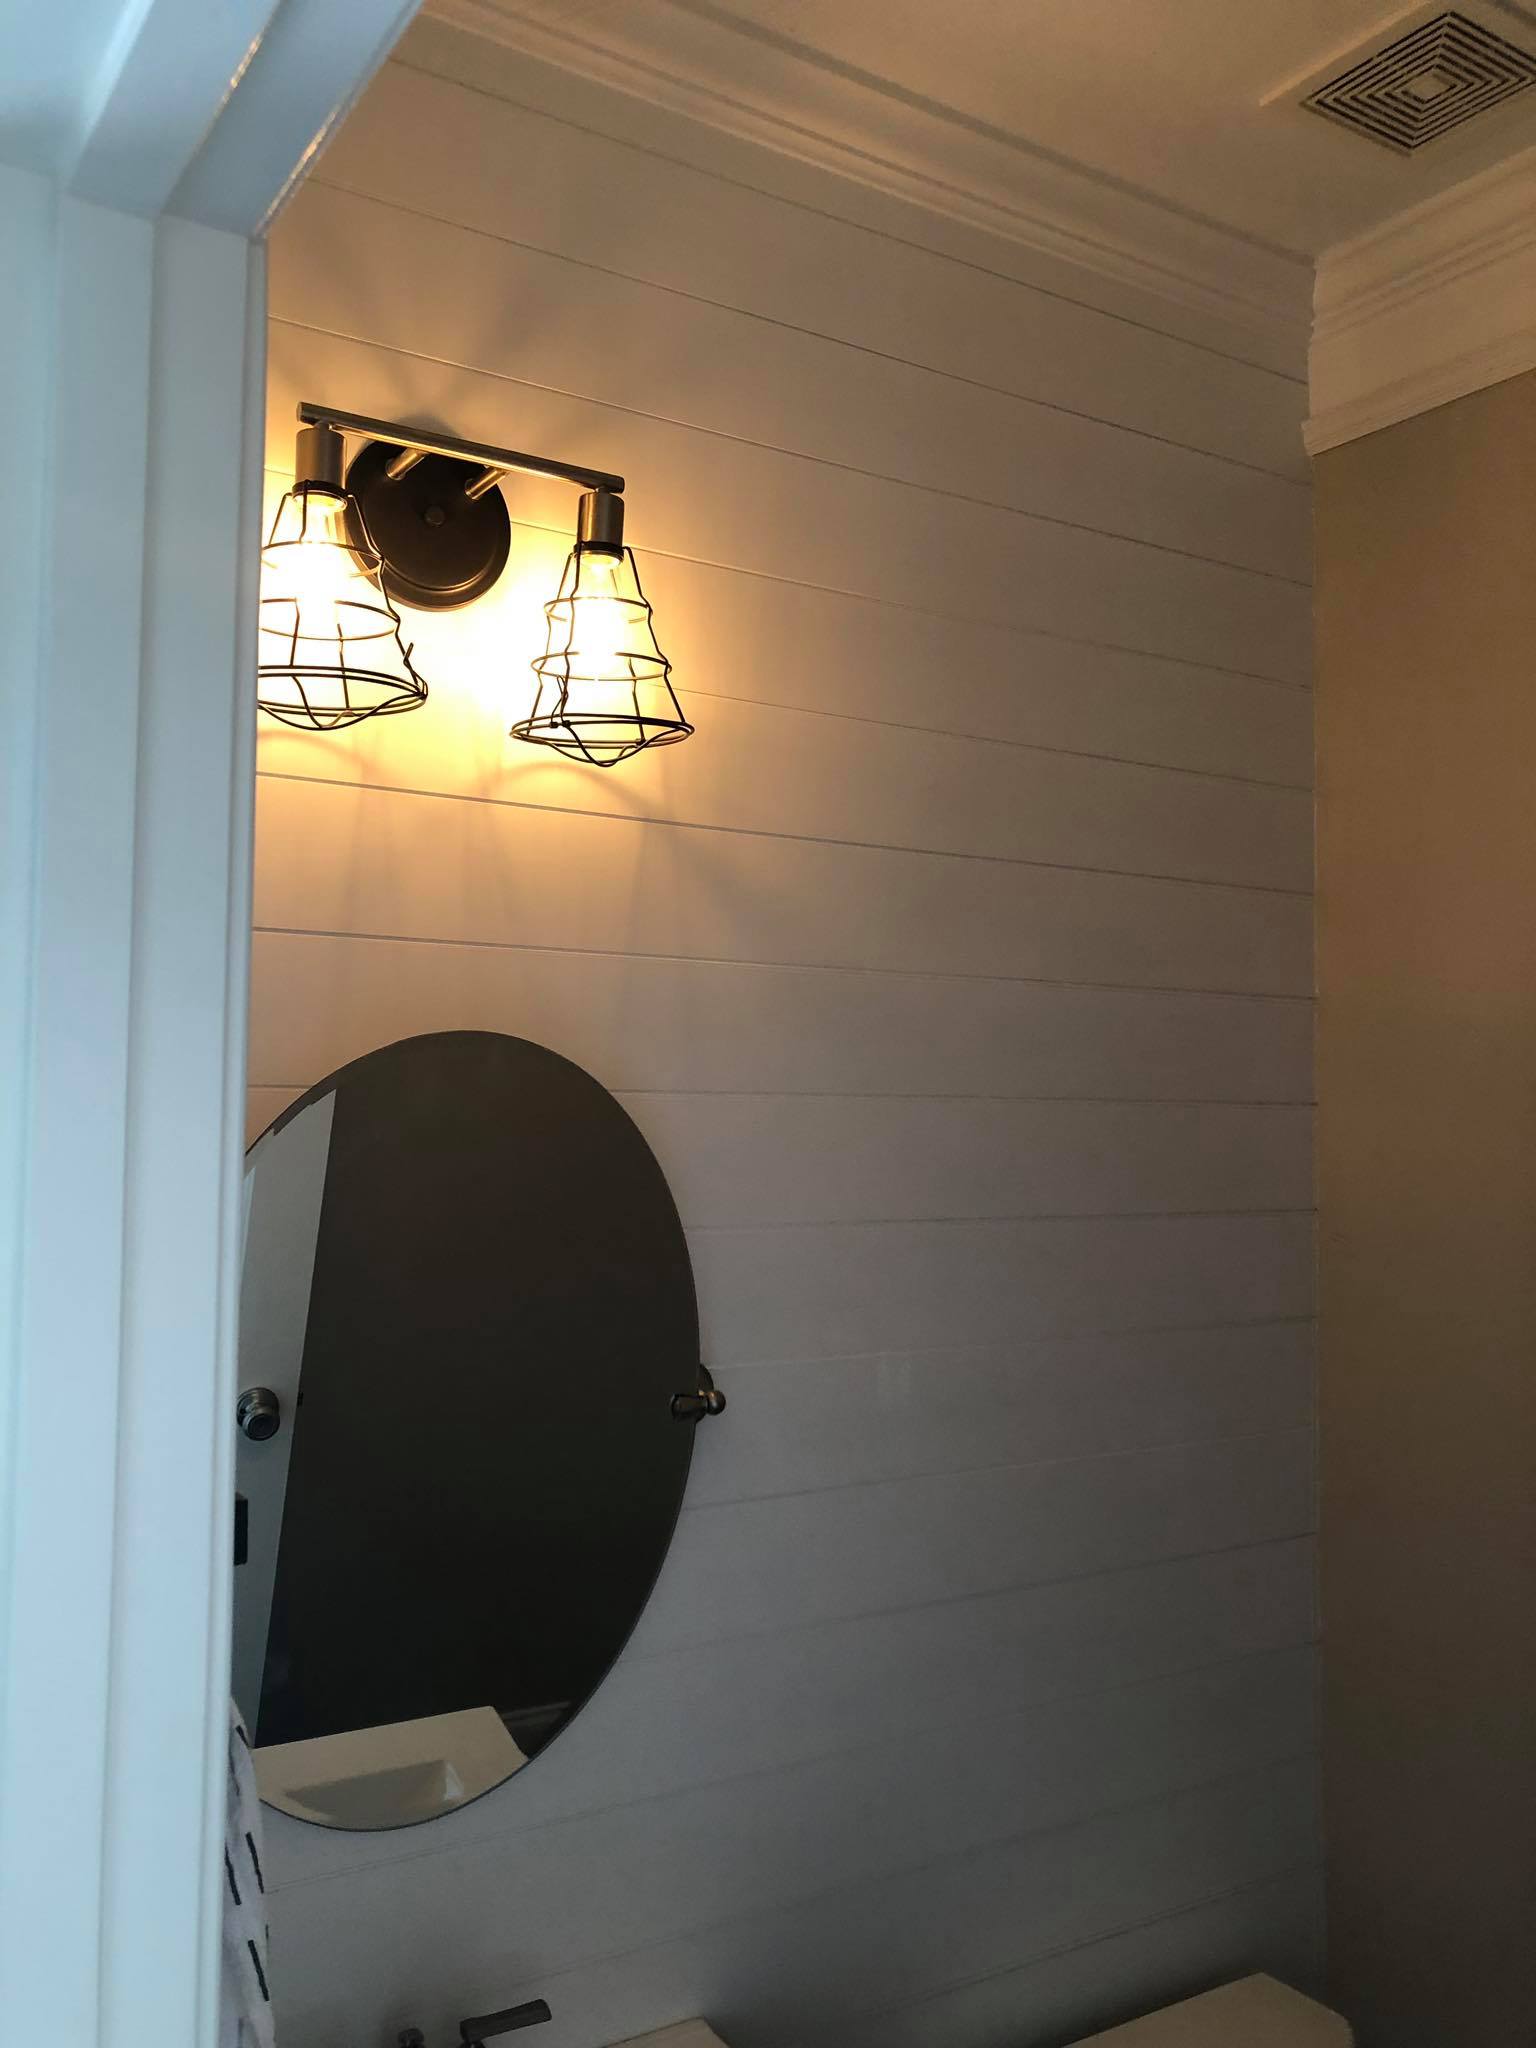 Shiplap Installation in Bathroom Walls 2 painted White